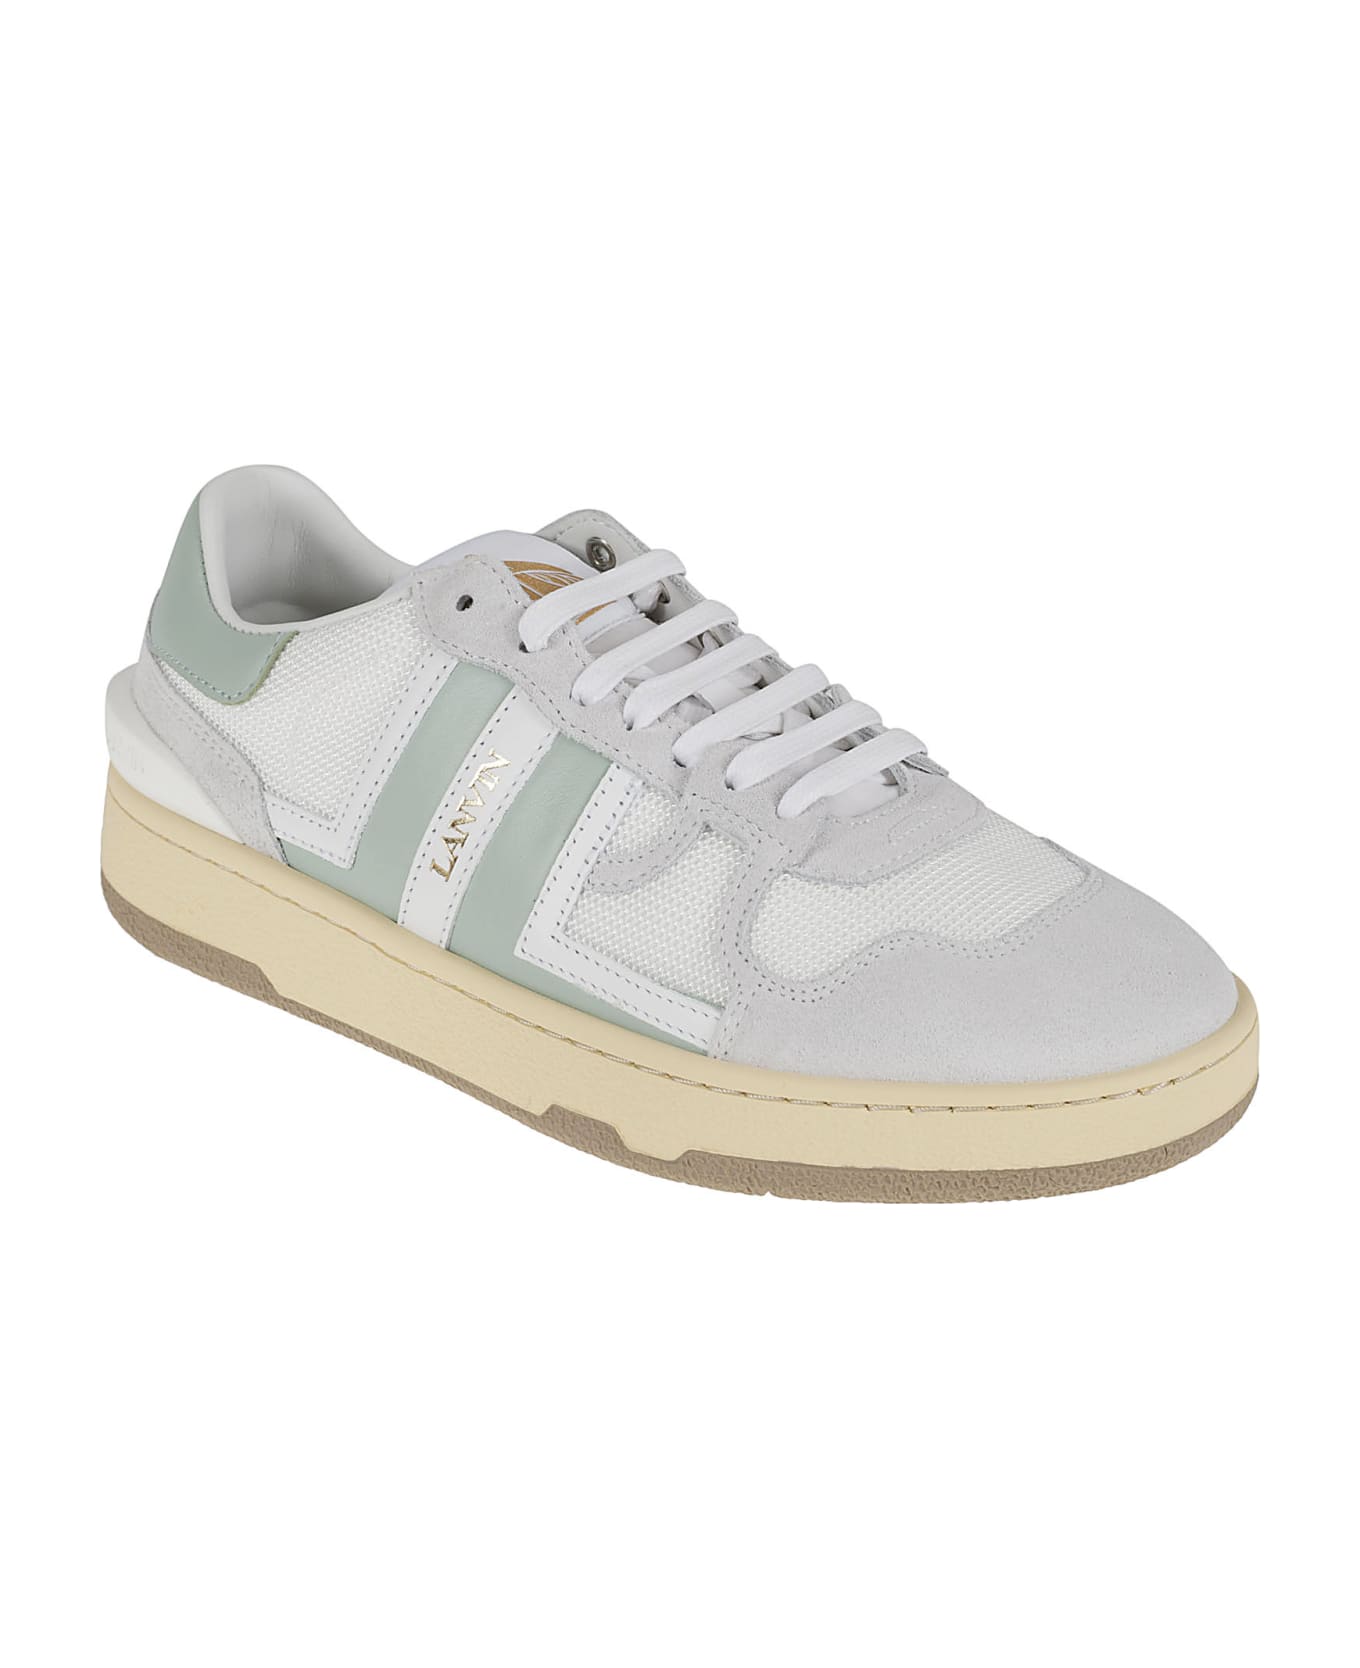 Lanvin Clay Low Top Sneakers - White/Sauge